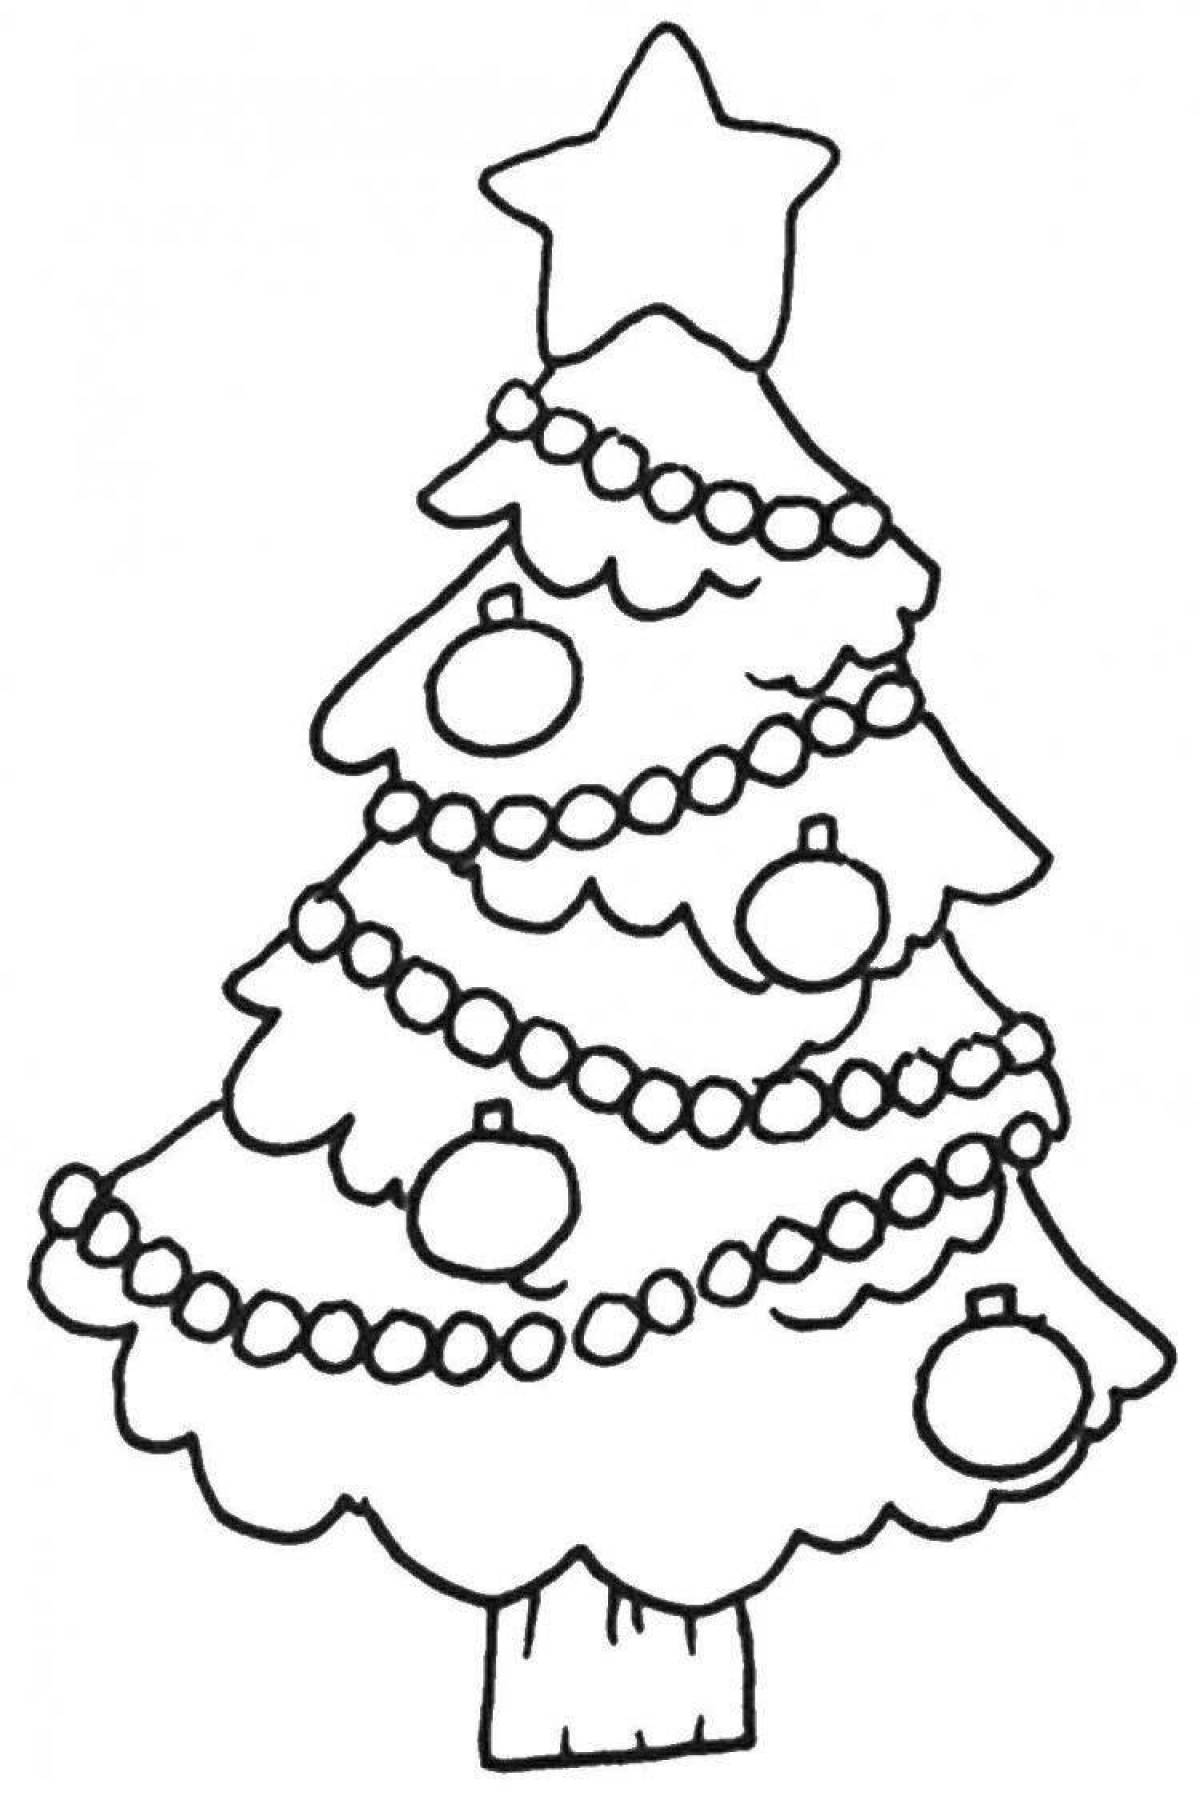 Magic Christmas tree coloring book for 5-6 year olds